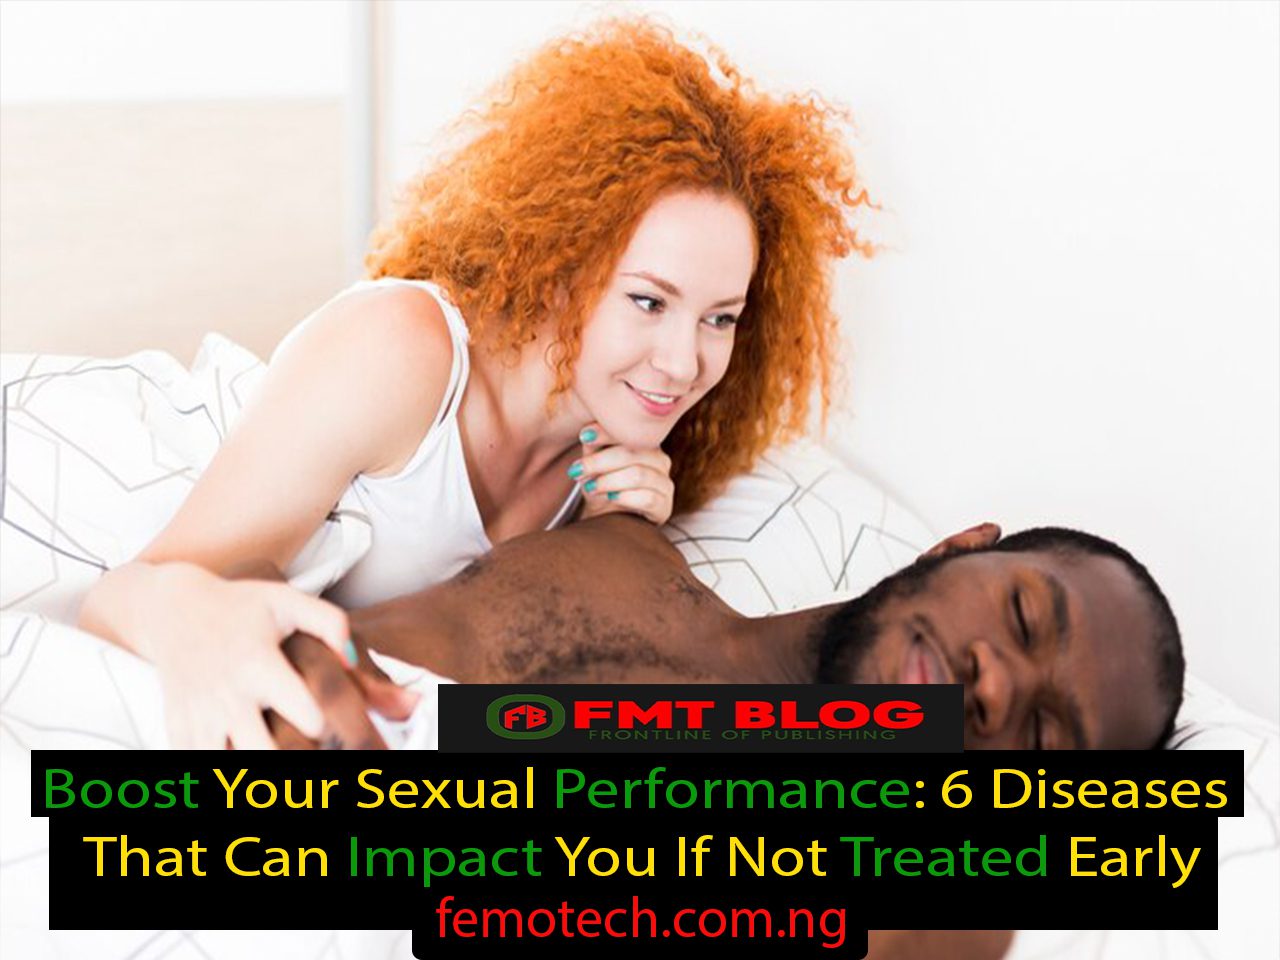 Boost Your Sexual Performance: 6 Diseases That Can Impact You If Not Treated Early